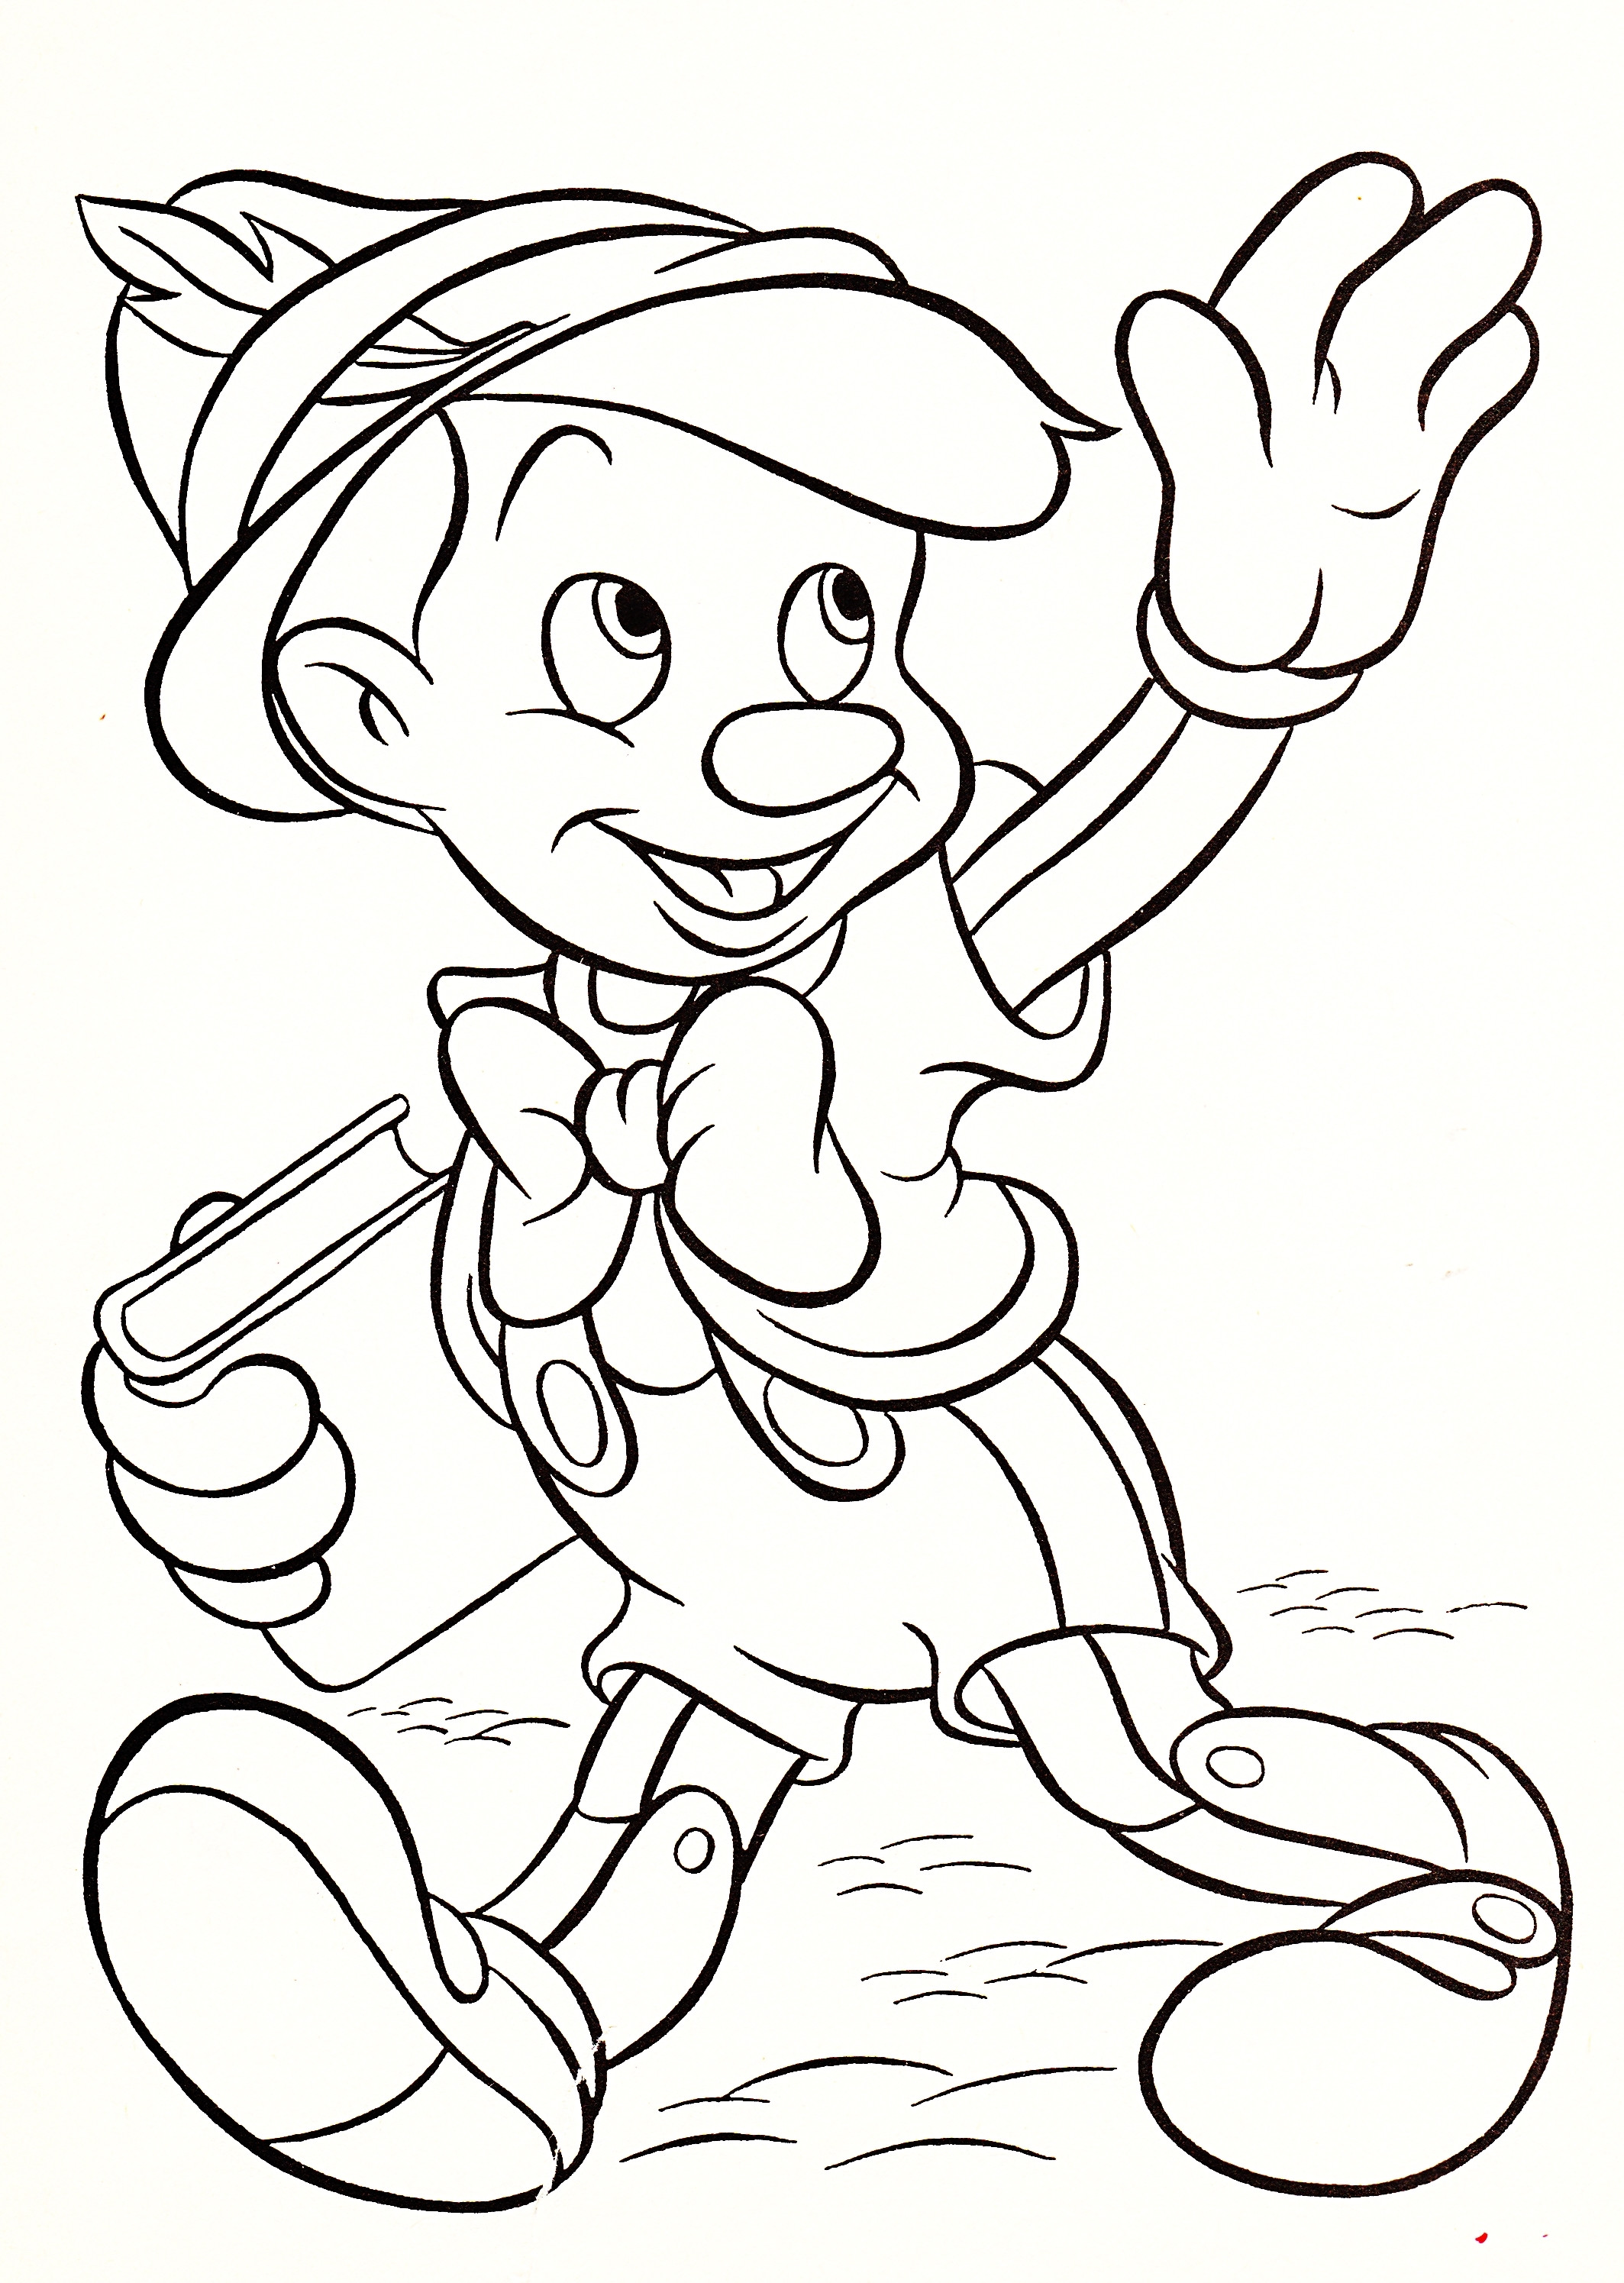 Free Coloring Sheets Disney
 Disney Characters Coloring Pages coloringsuite